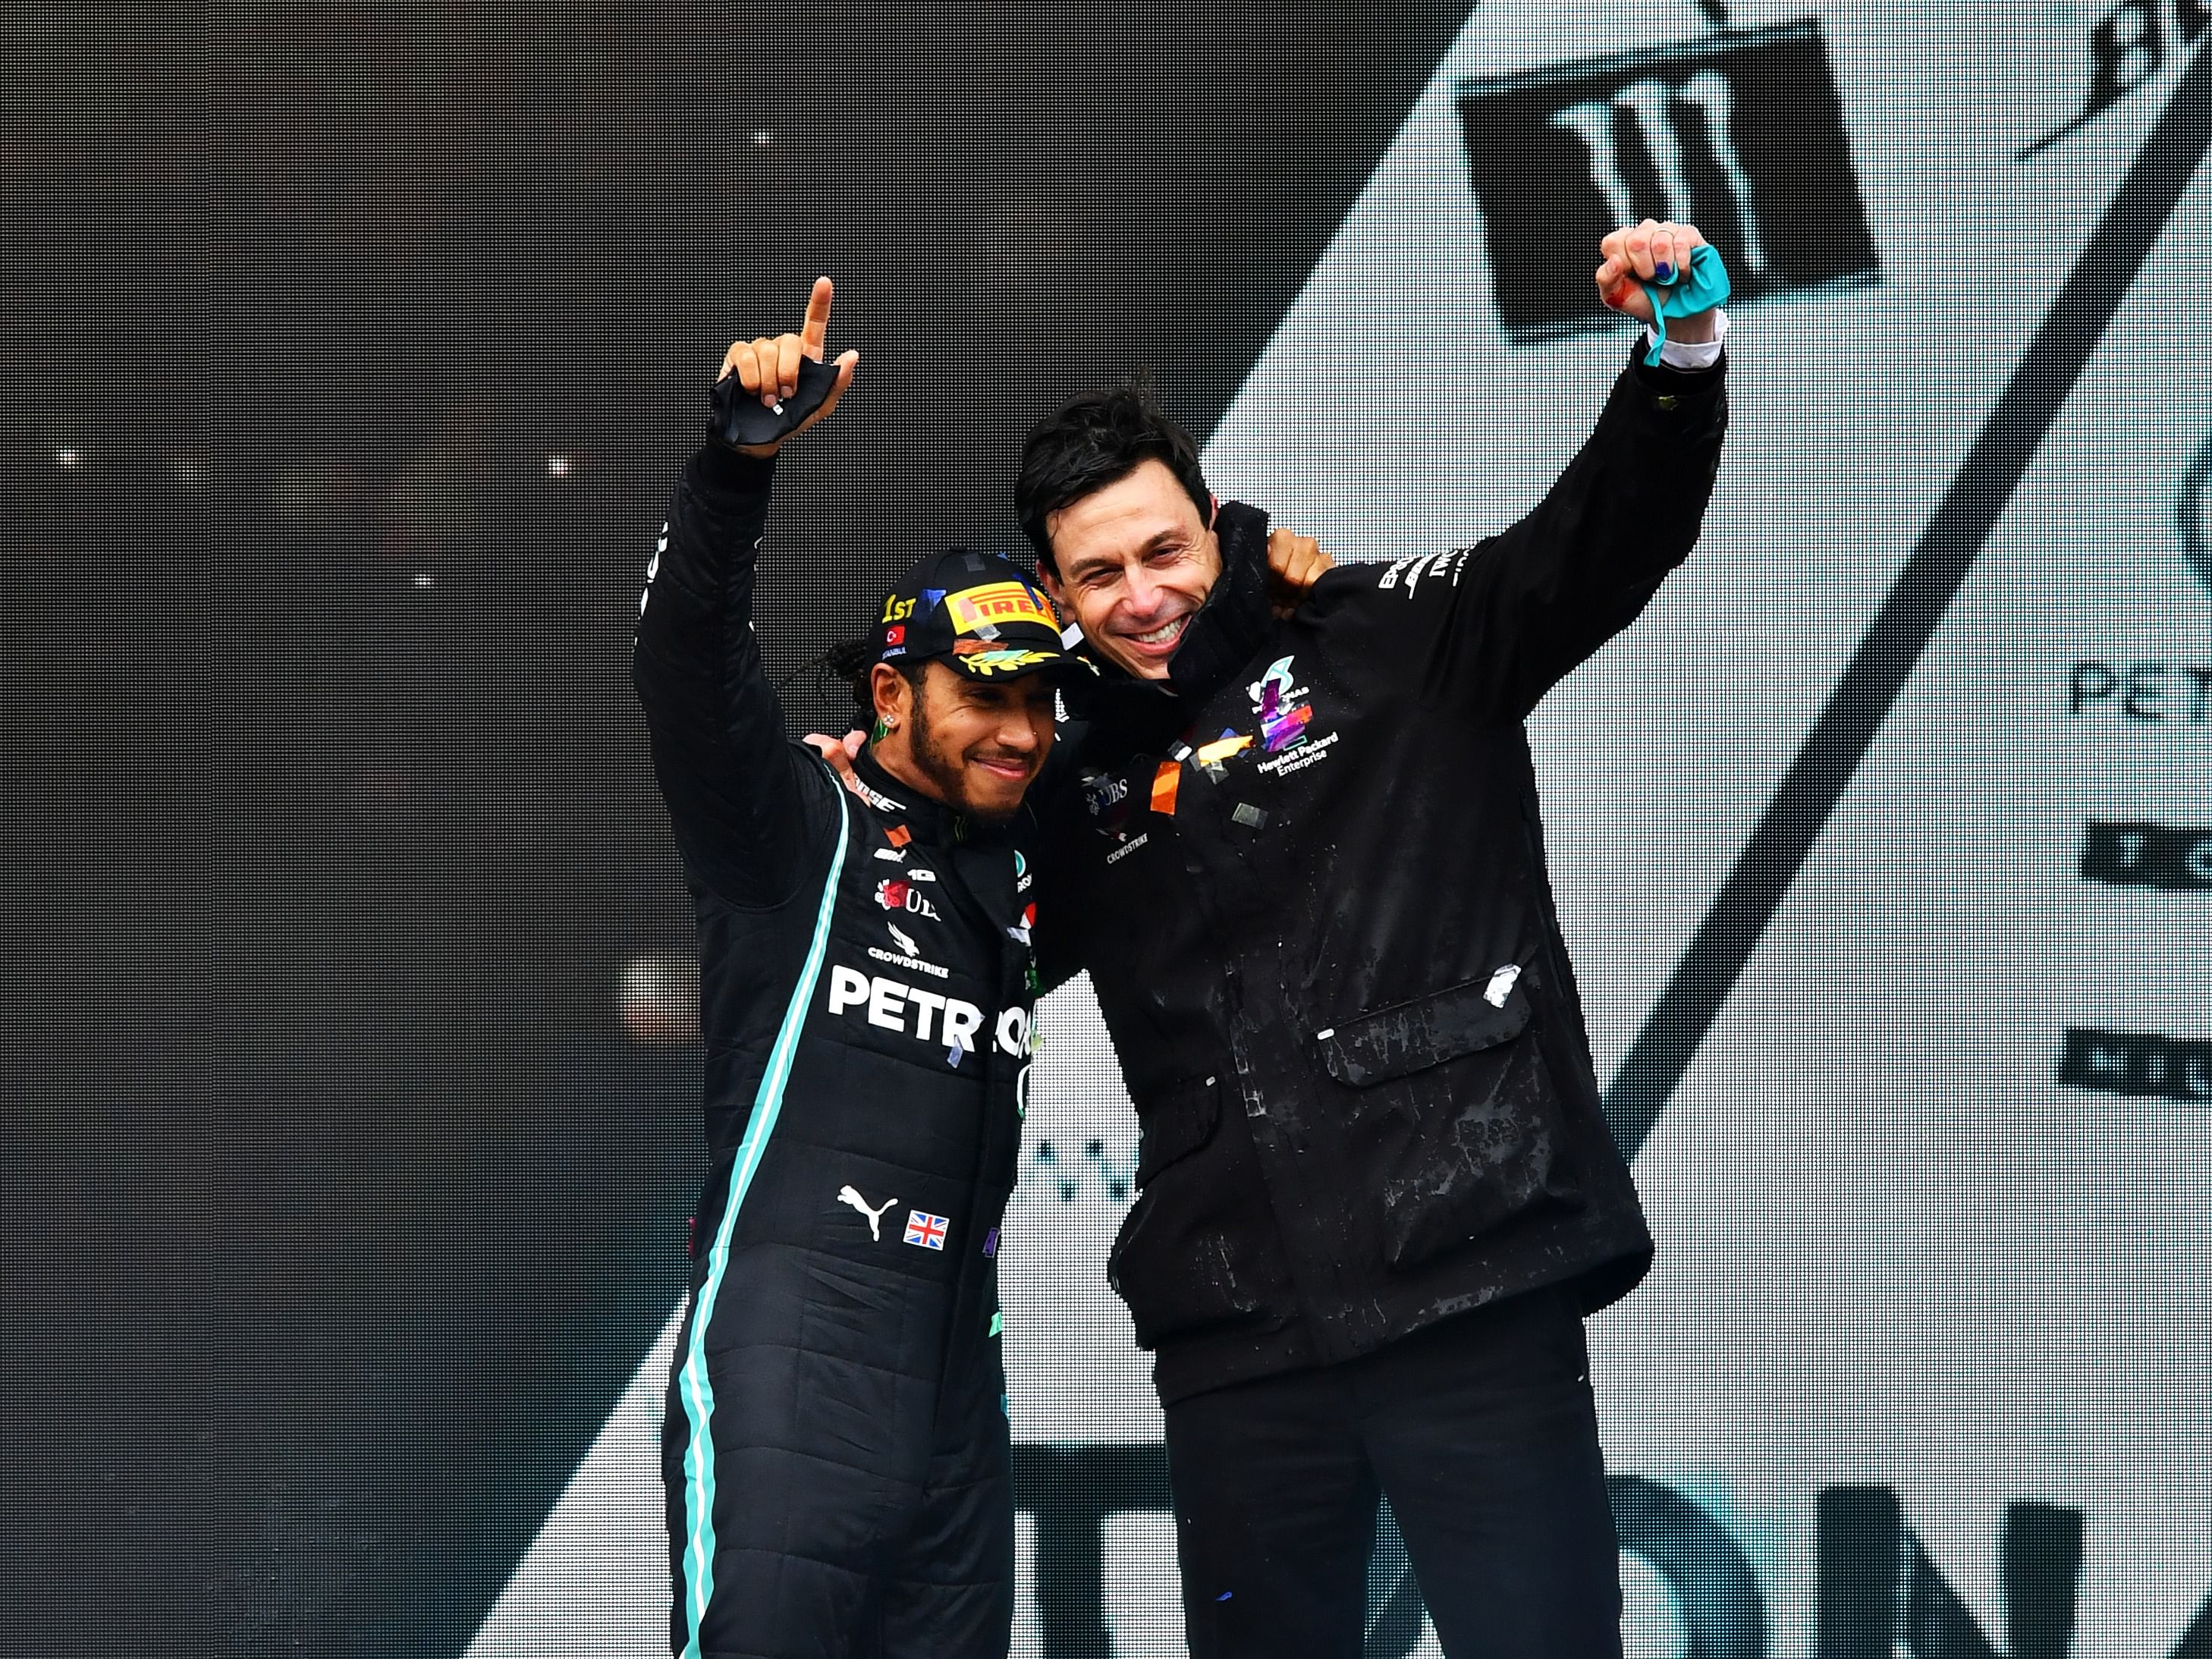 Lewis Hamilton celebrates winning the 7th F1 World Drivers Championship with Toto Wolff on the podium during the 2020 F1 Turkish Grand Prix. (Photo by Getty Images/Getty Images)